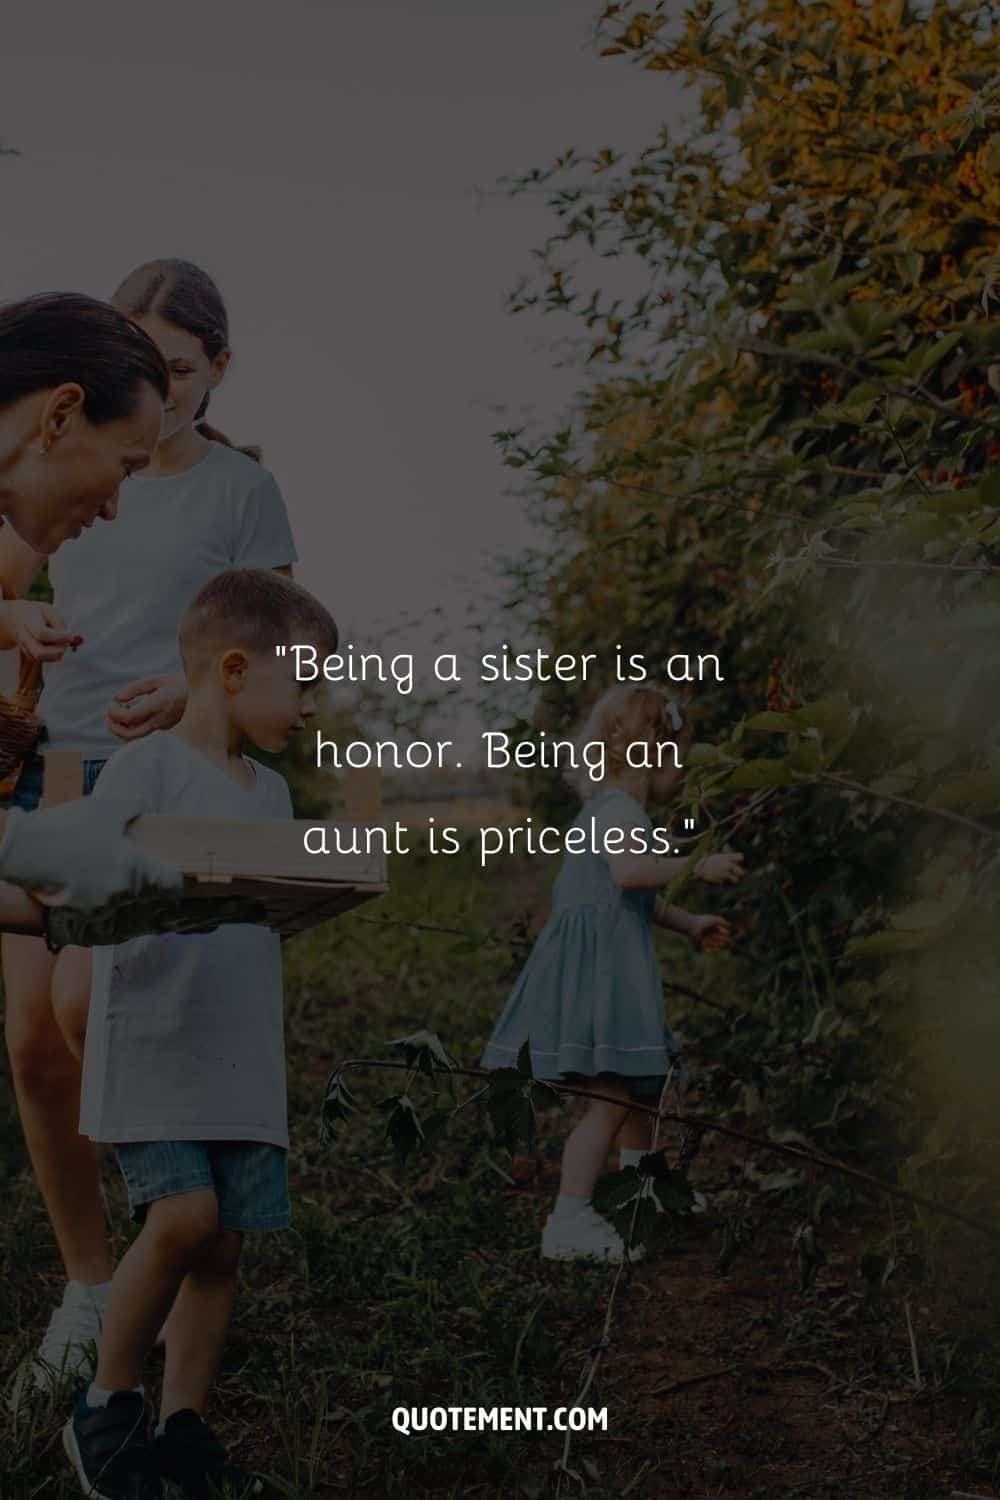 Image of kids playing representing being an aunt quote.